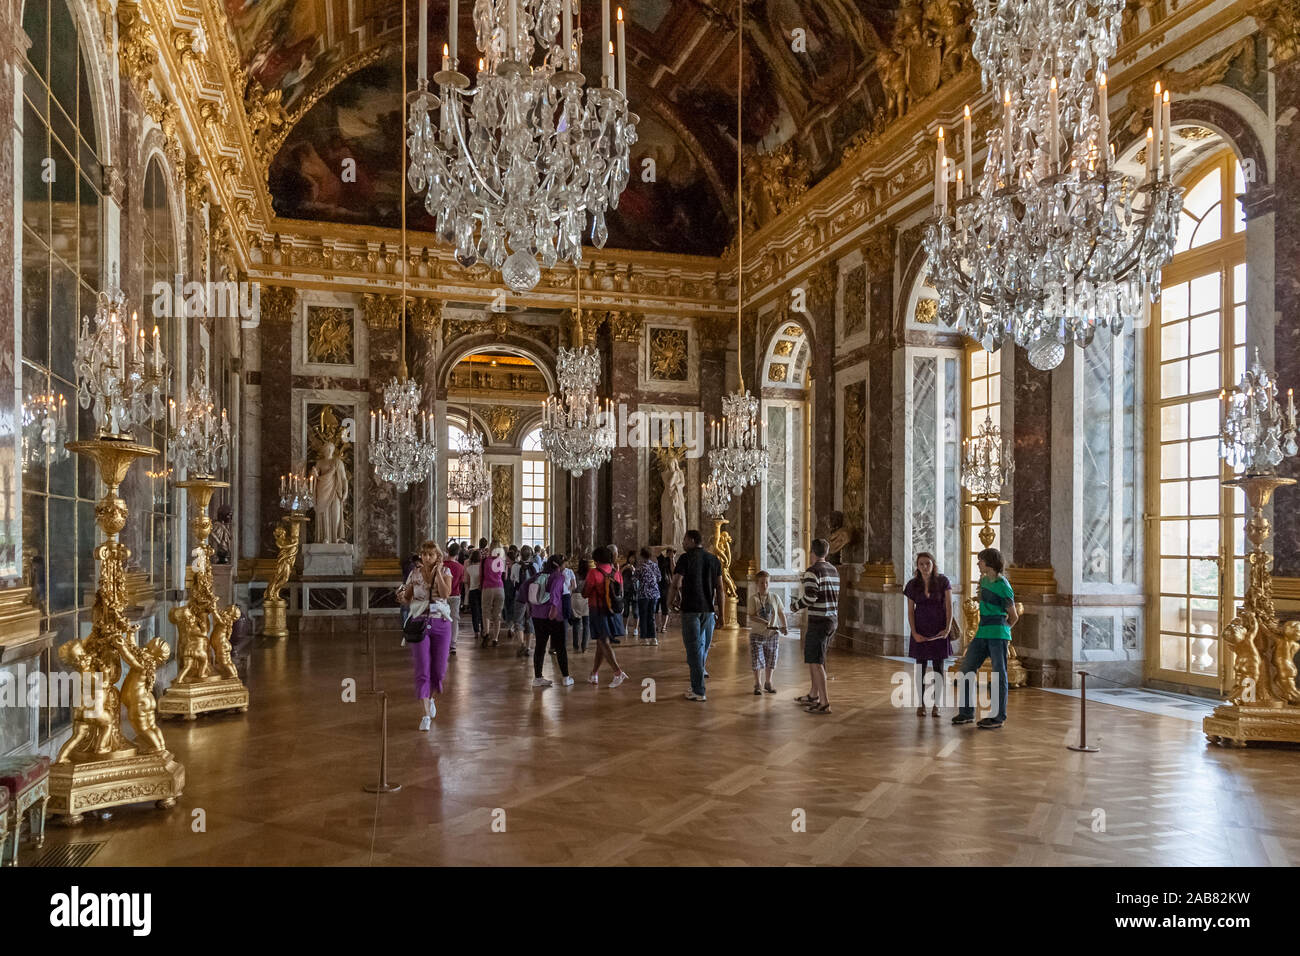 Great view of the beautiful Hall of Mirrors in the Palace of Versailles. Surrounded by crystal chandeliers and gilded sculptures, the remarkable... Stock Photo